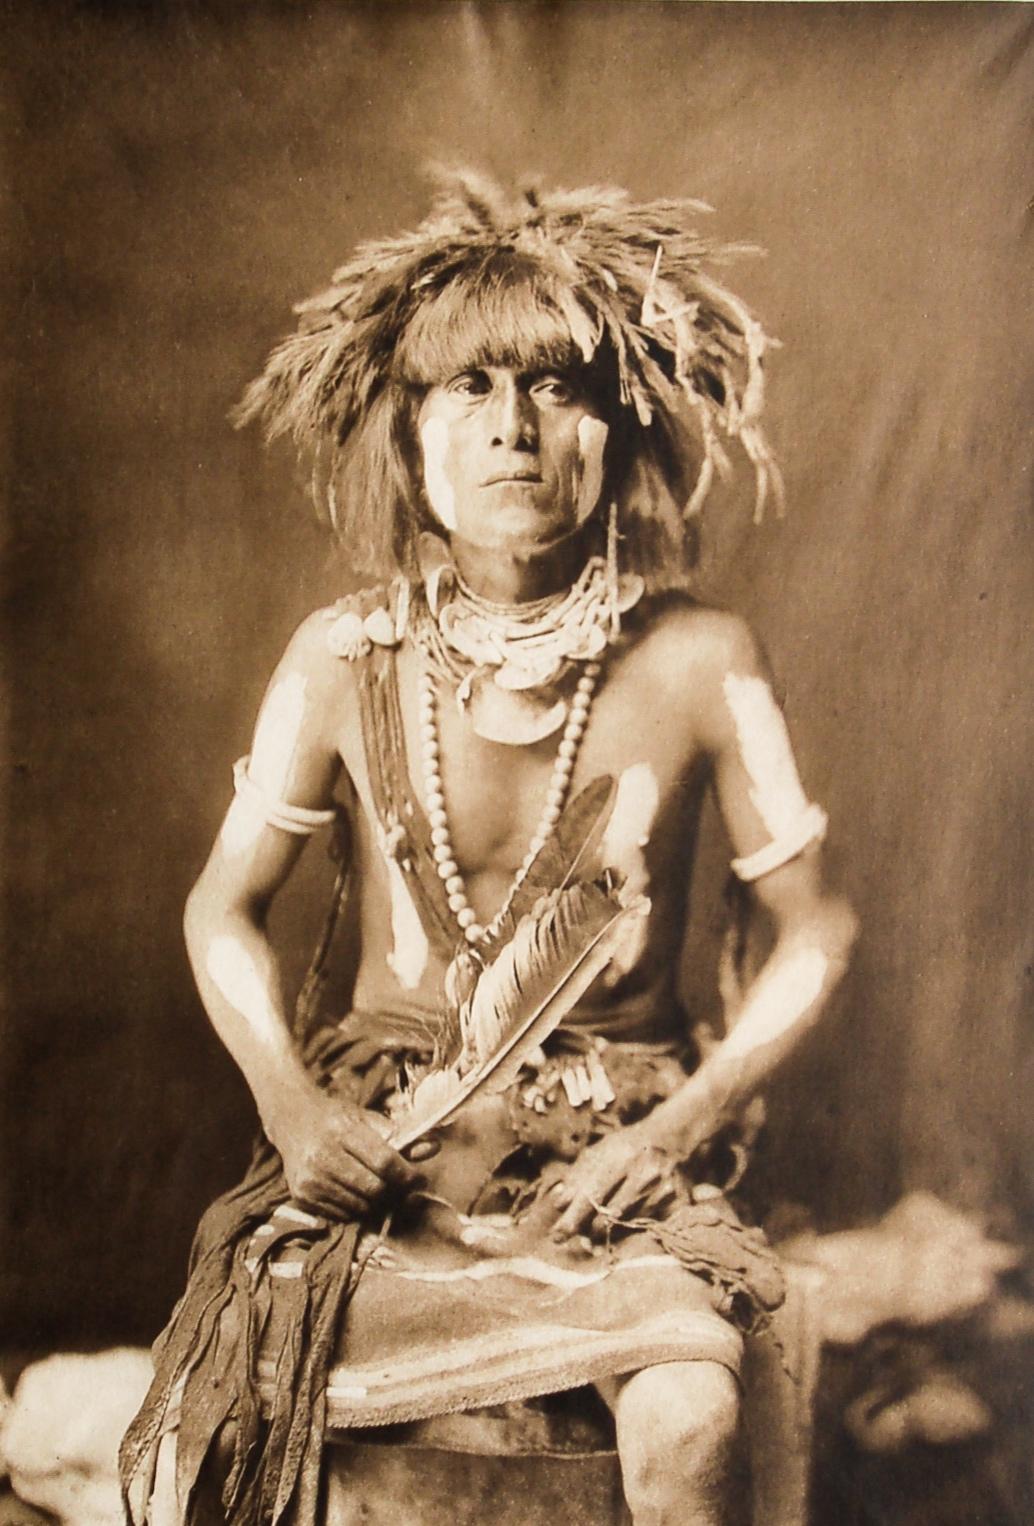 Vintage large format Edward S. Curtis Portfolio Photogravure, Portfolio 12, Plate #408, The North American Indian, on Japan Tissue paper.

The Japan Tissue paper was the most expensive and rarest of the three vintage hand made papers Curtis used to